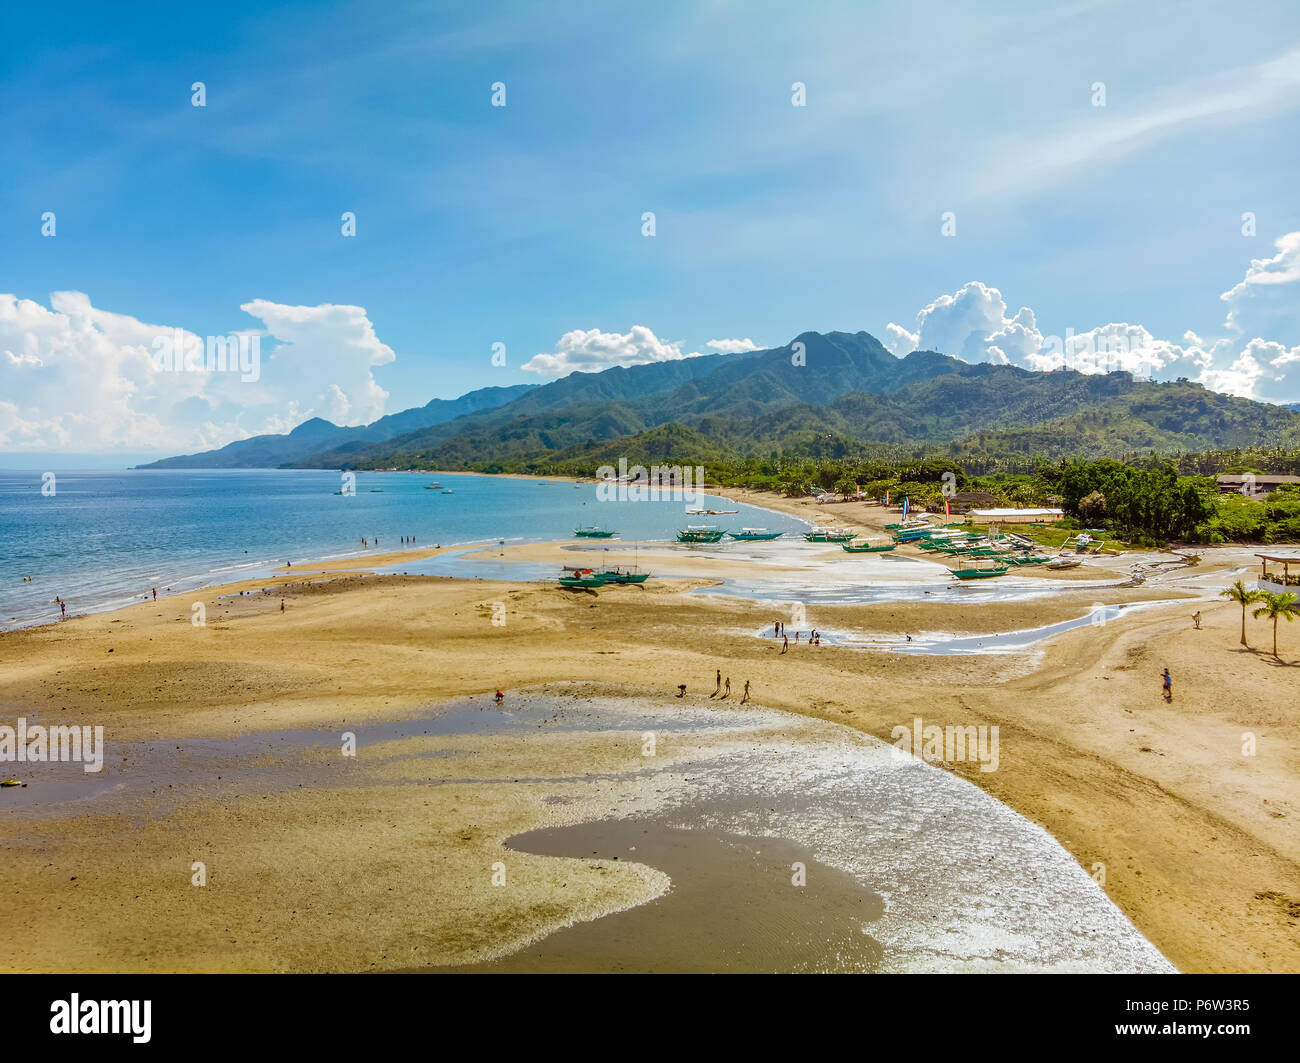 Laiya, San Juan, Batangas and its beautiful mountain background - the  mountain ranges (notable are Mt. Daguldol and Mt. Hugom) Stock Photo